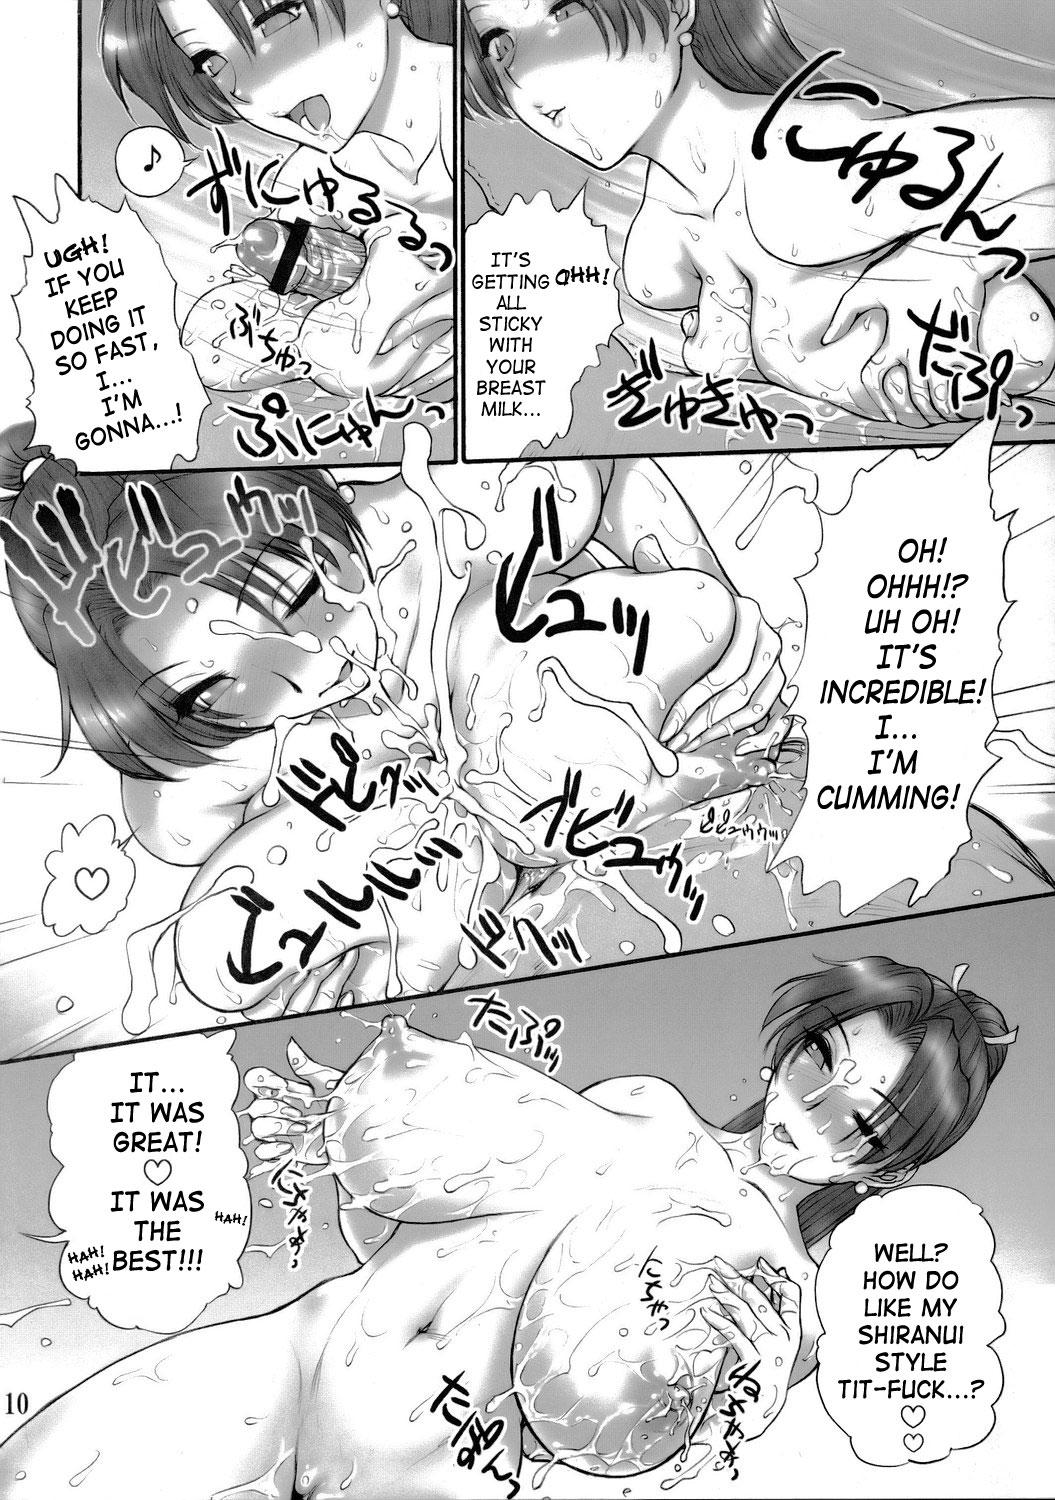 Movies (SC29) [Shinnihon Pepsitou (St. Germain-sal)] Report Concerning Kyoku-gen-ryuu (The King of Fighters) [English] [SaHa] - King of fighters Sexy - Page 11